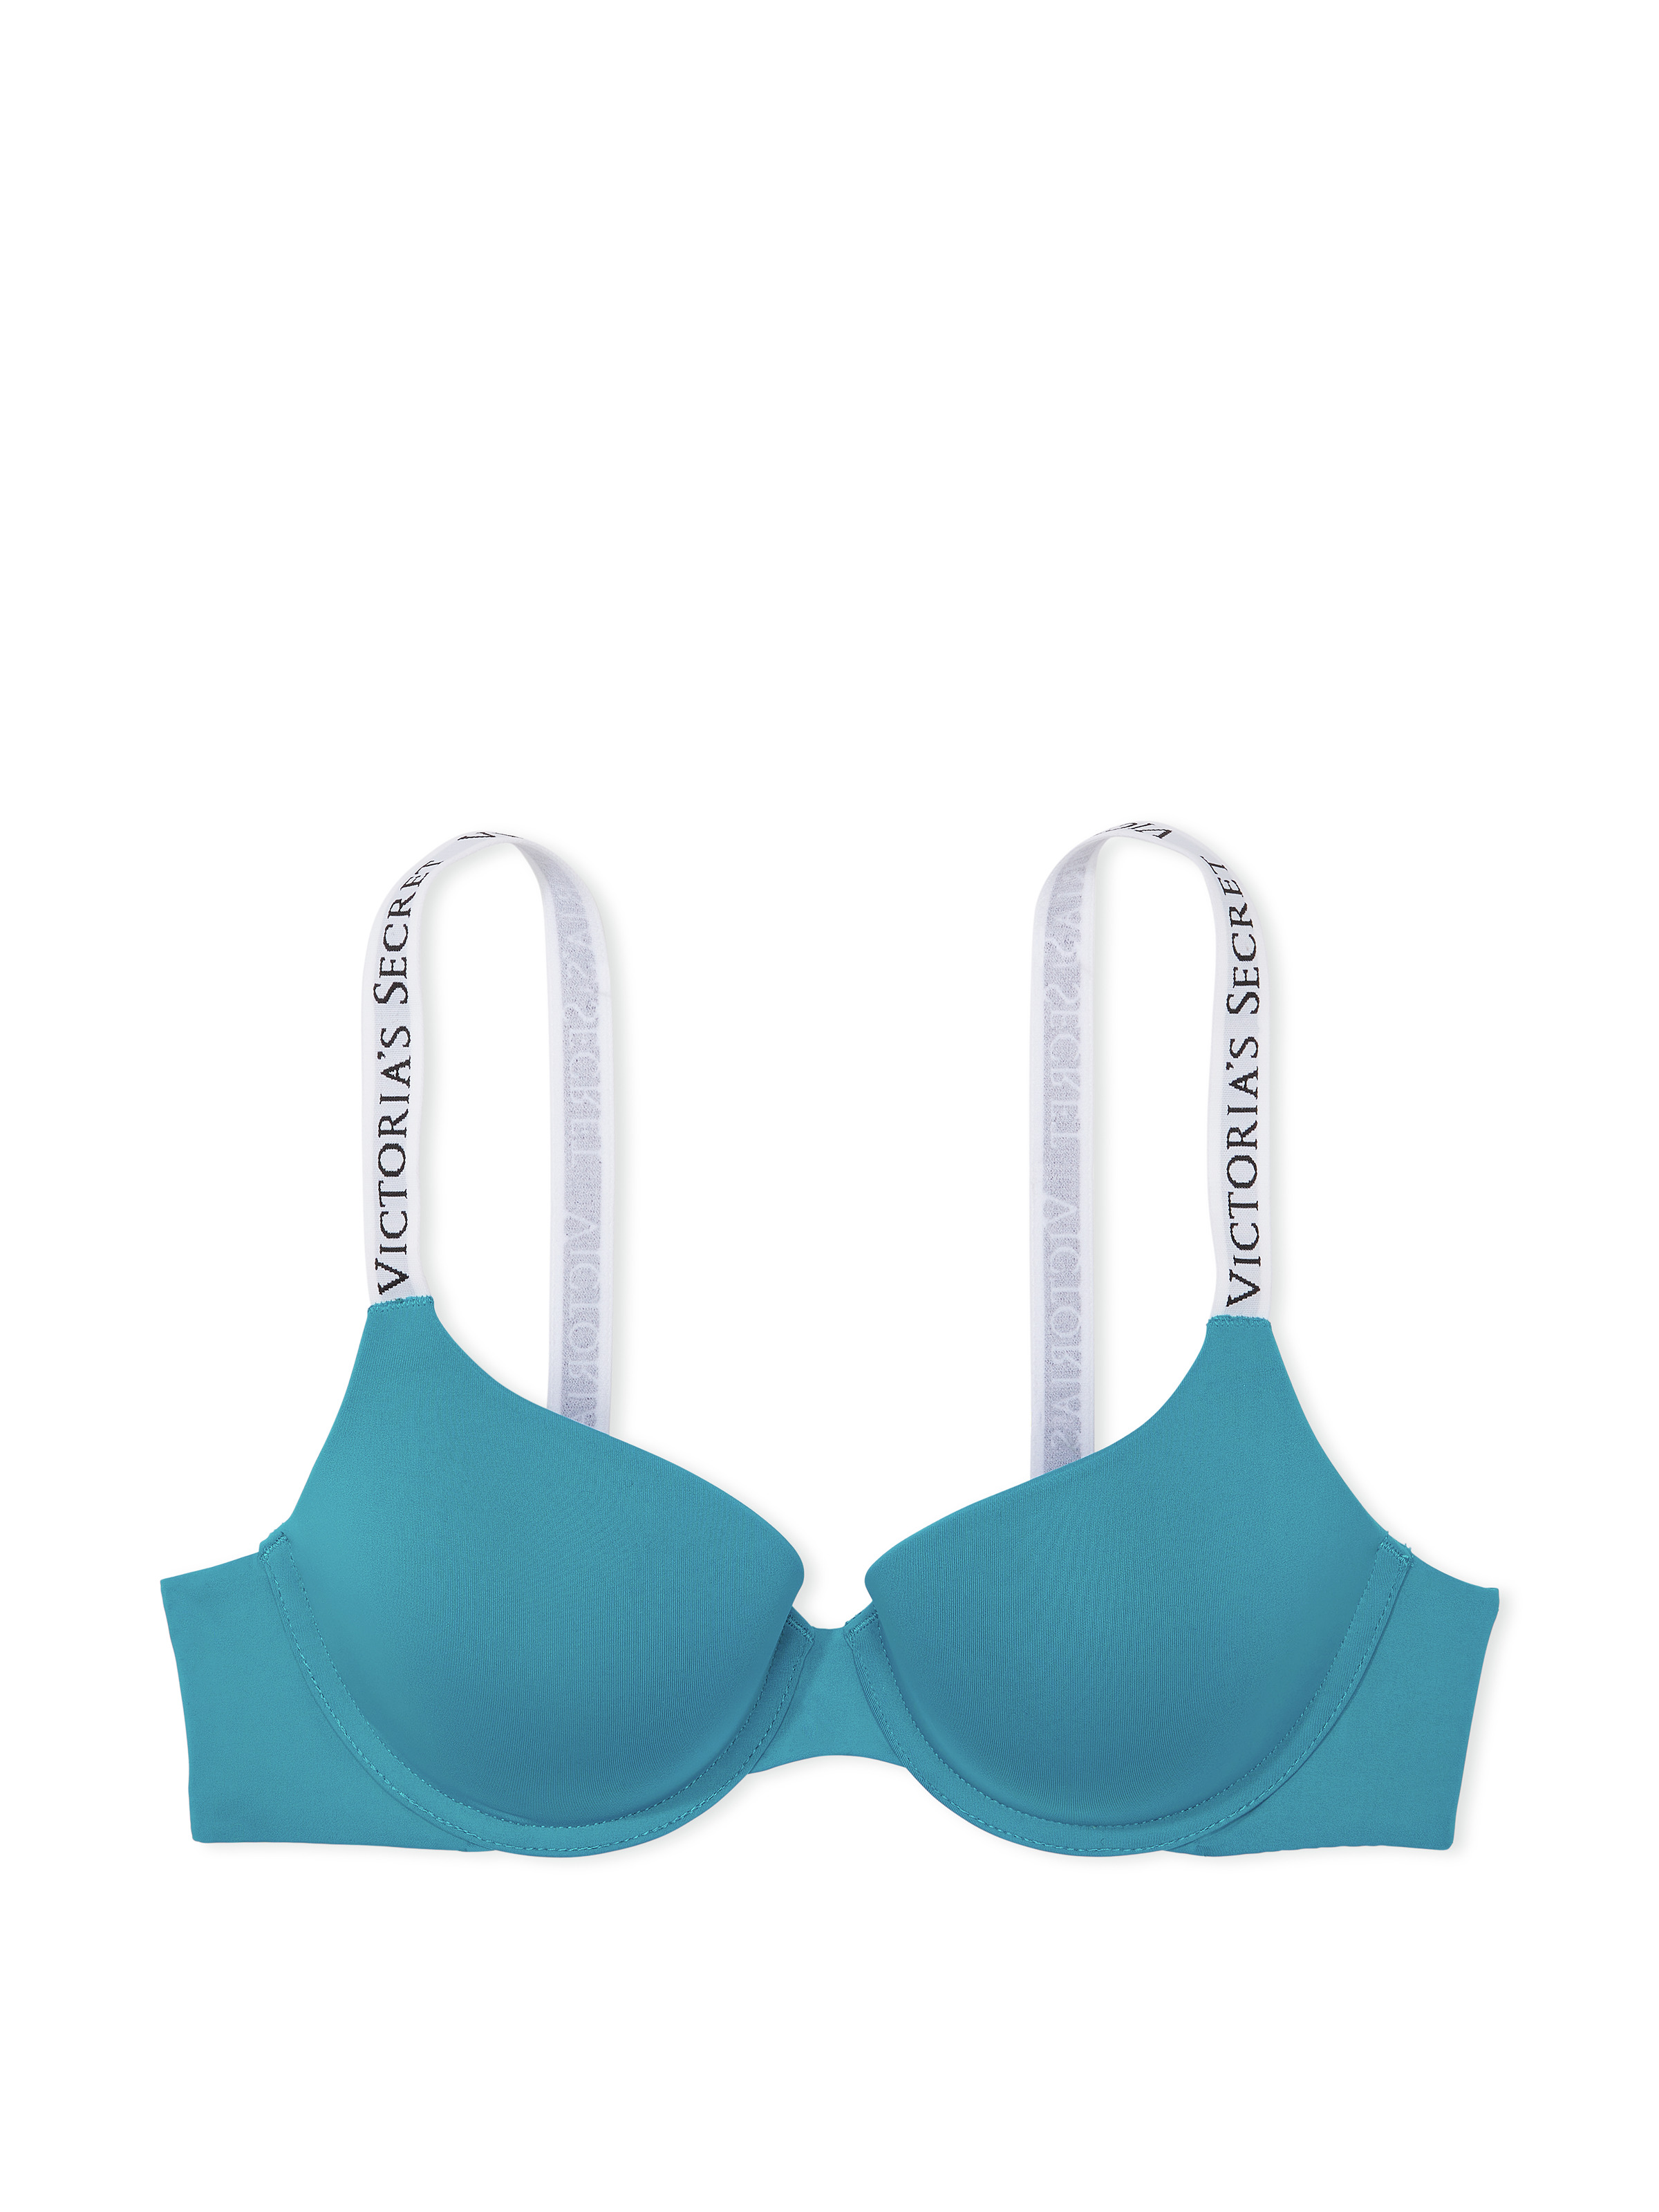 Buy The T-Shirt Push-Up Perfect Shape Bra Online in Doha & Al